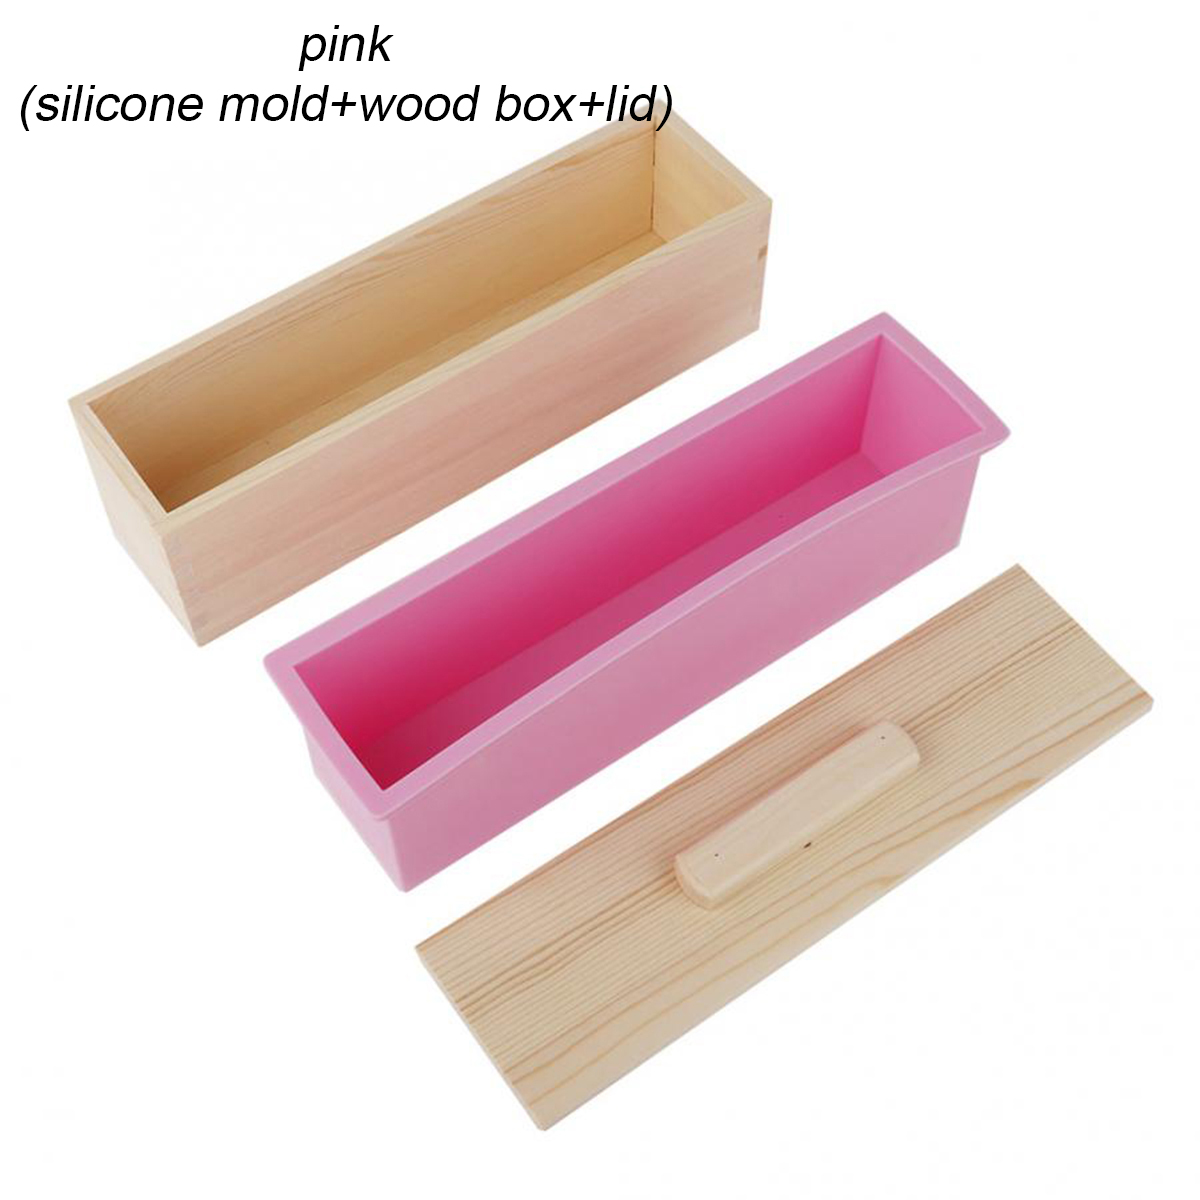 New-Wood-Loaf-Soap-Mould-with-Silicone-Mold-Cake-Making-Wooden-Box-Soap-1602226-4